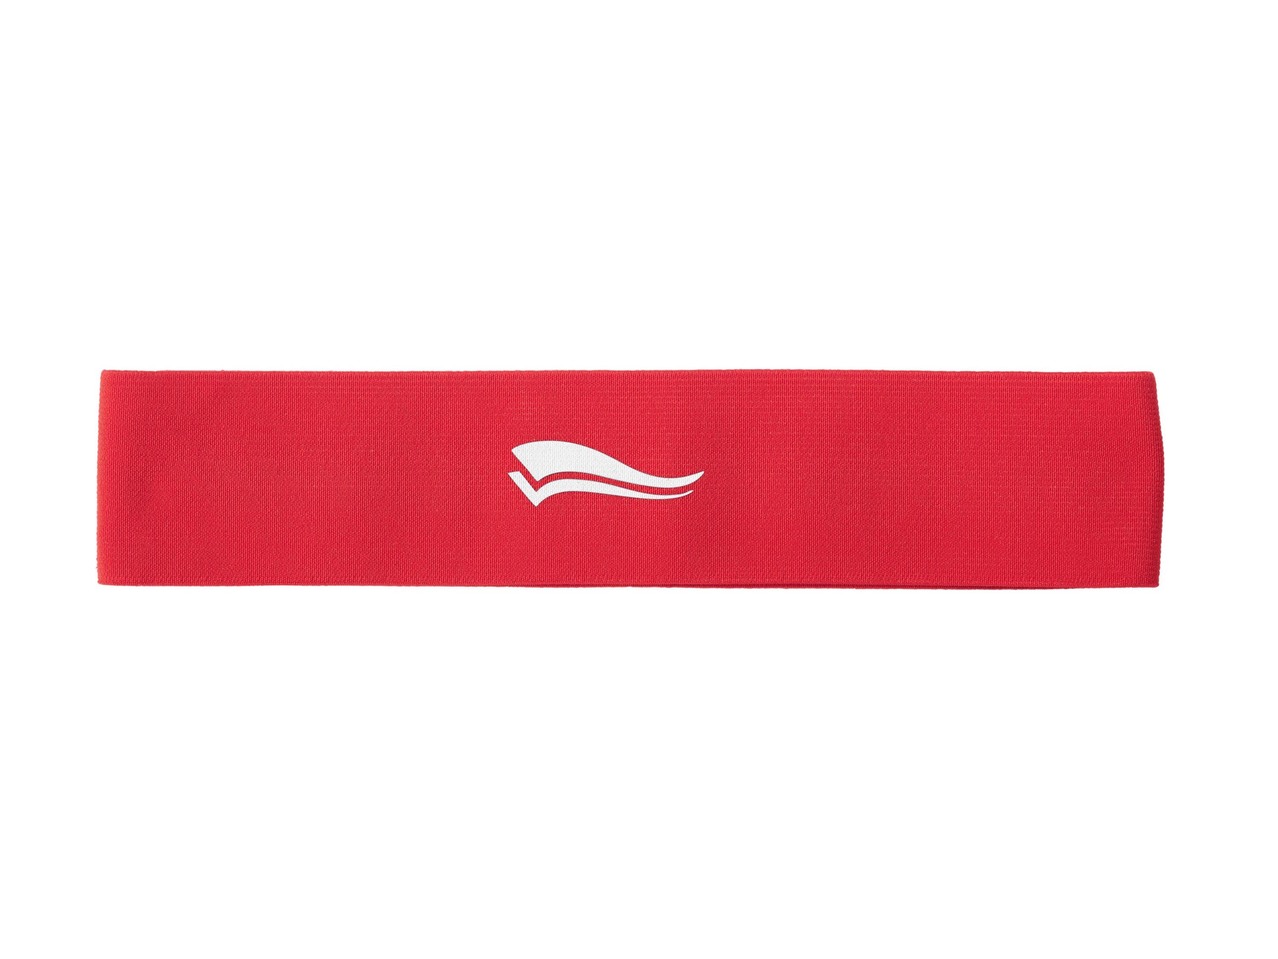 Resistance Band or Resistance Band Set, 3 pieces